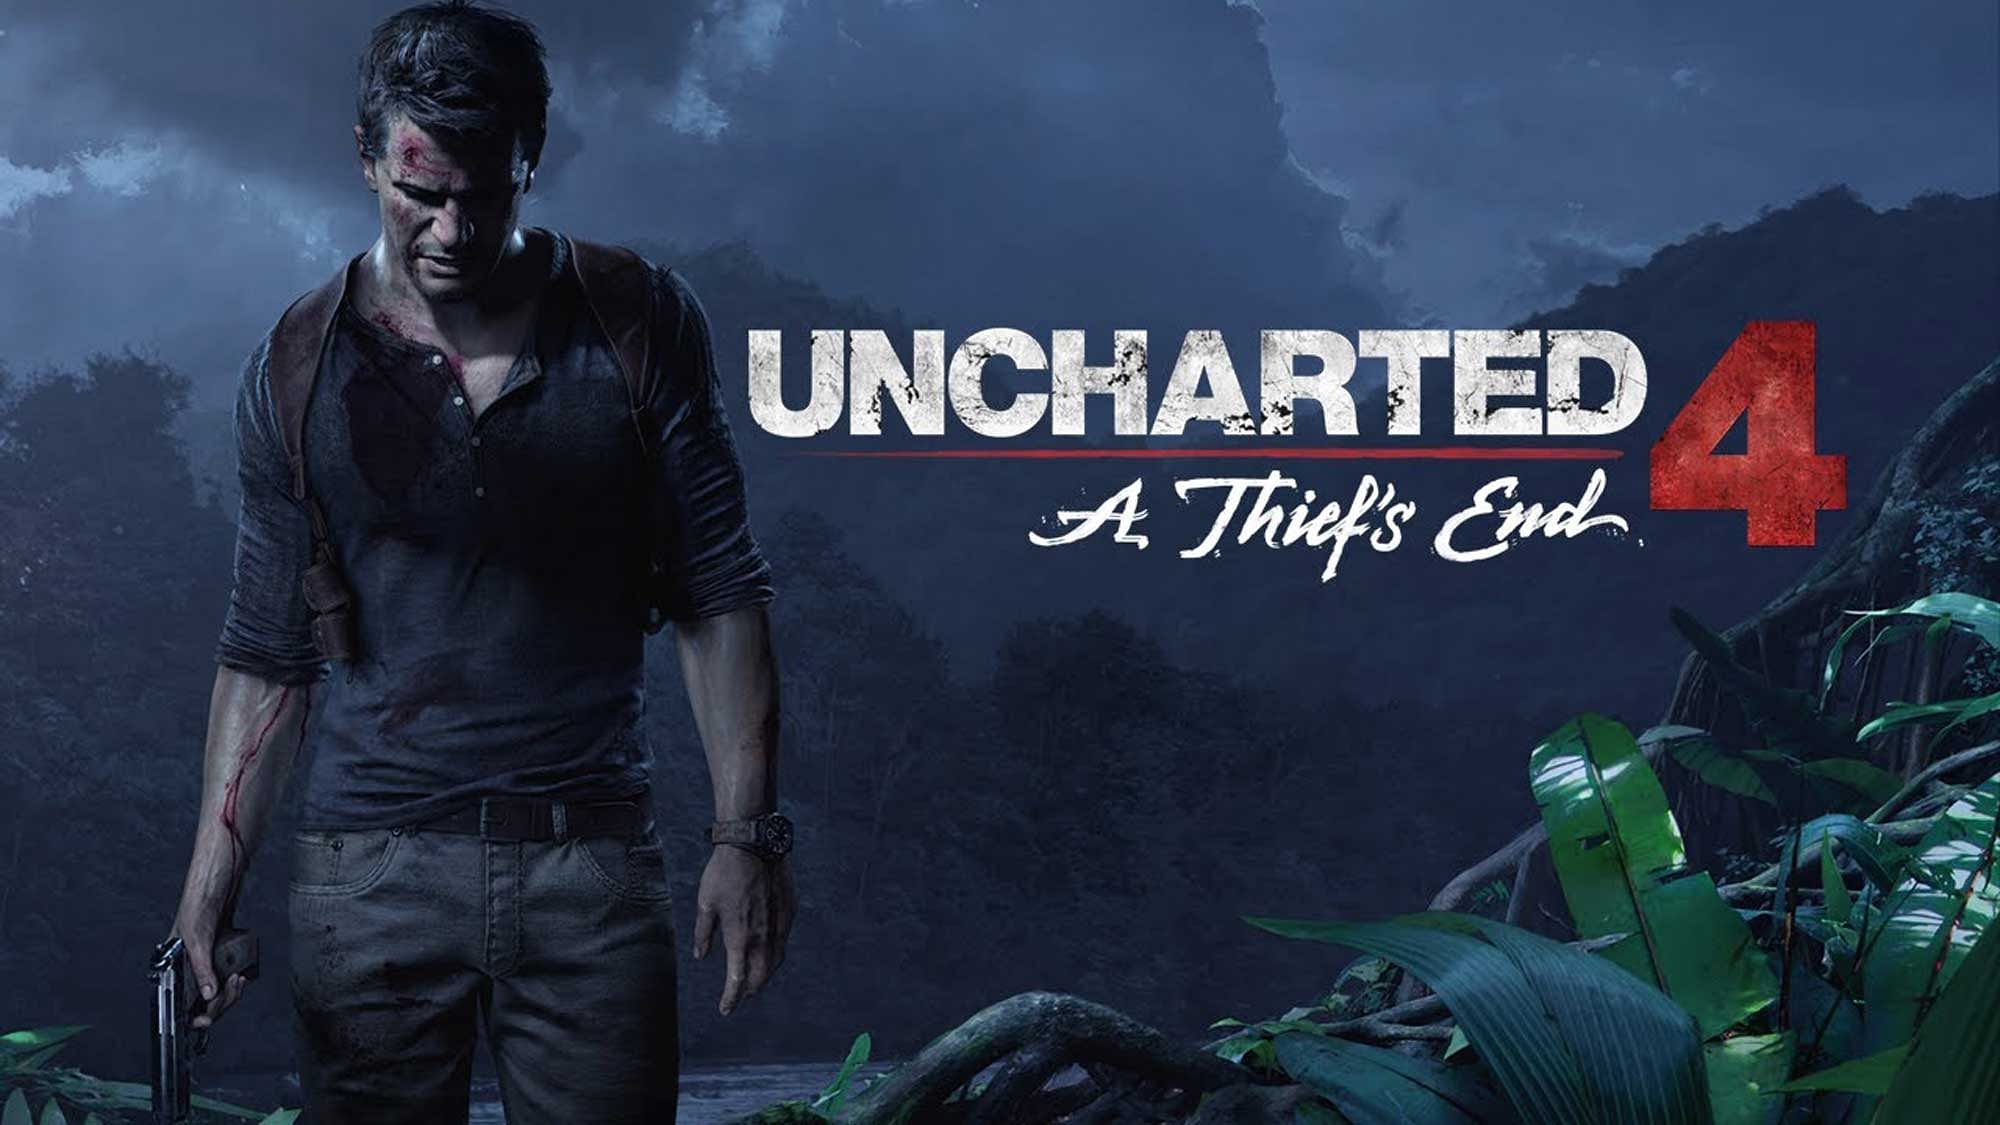 Uncharted 4 is available via Play Store during the Diwali sale.&nbsp;